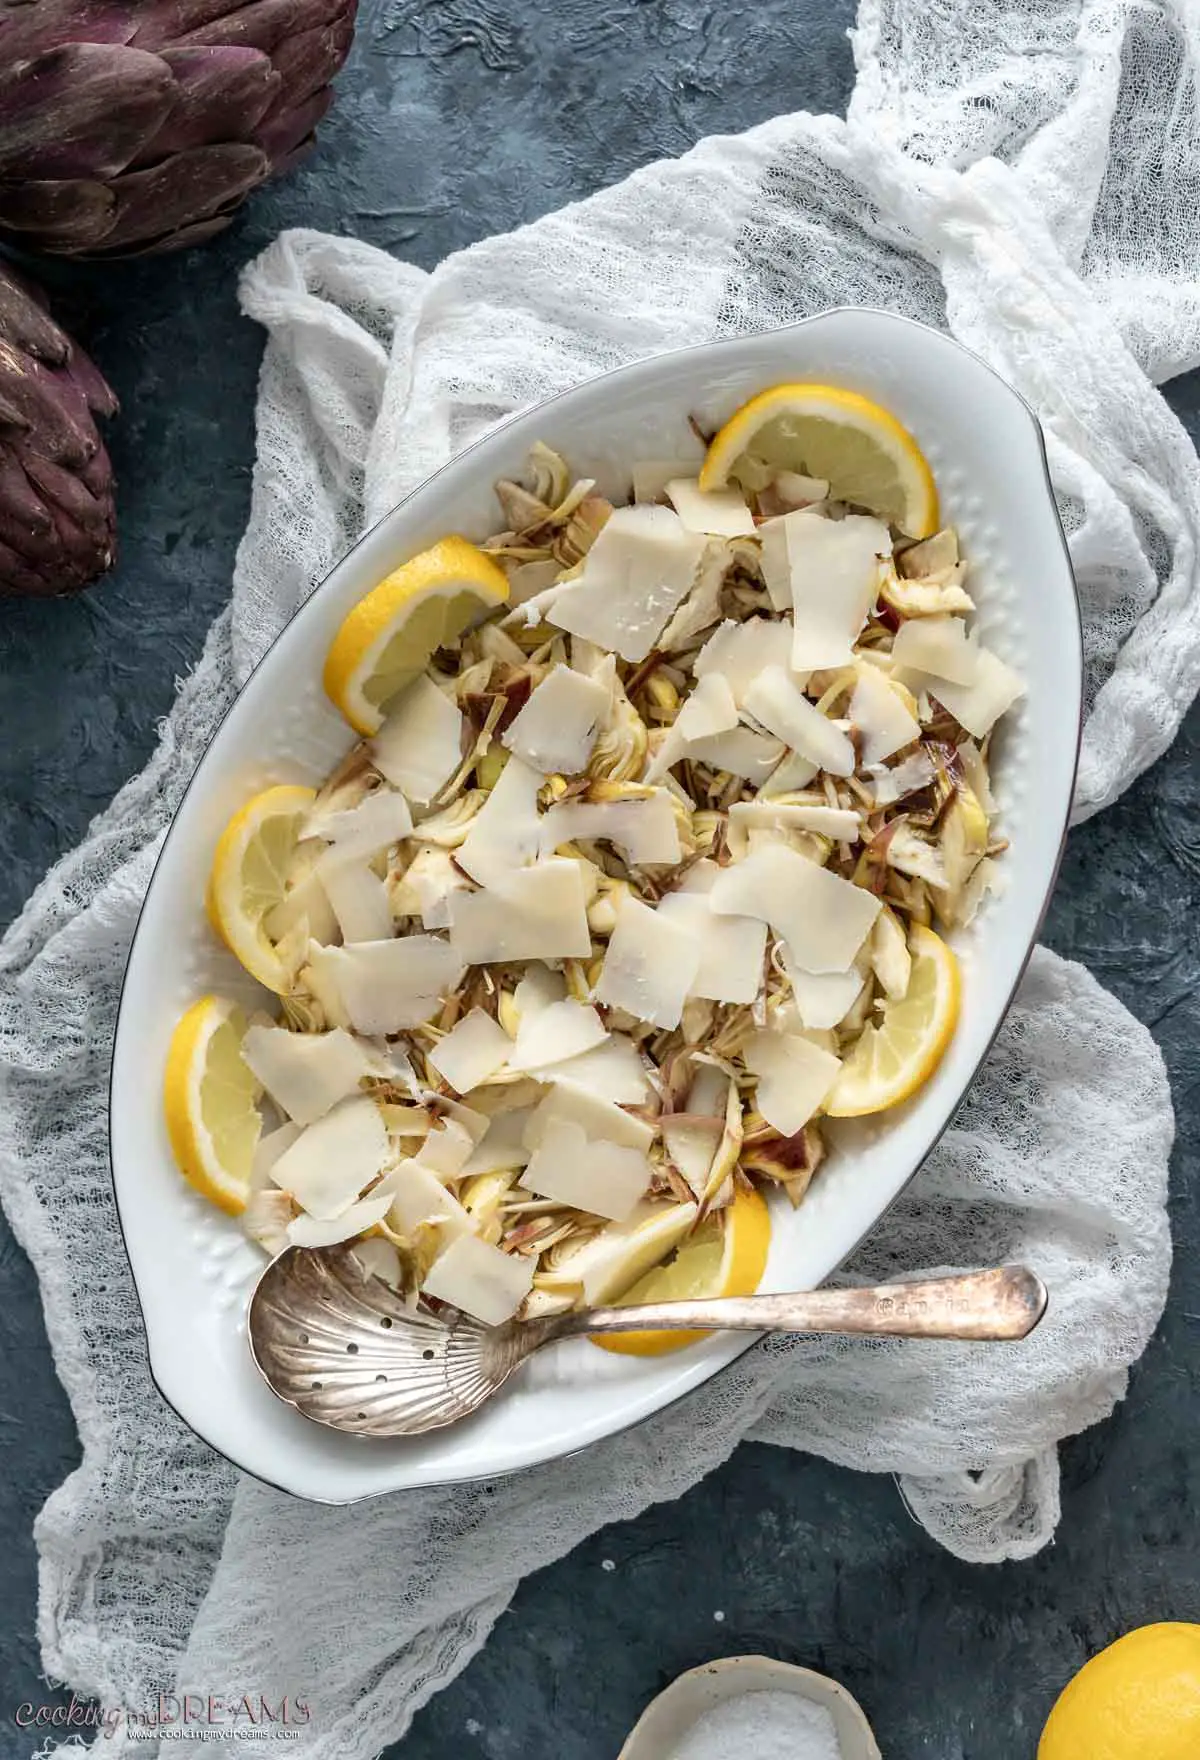 shaved artichoke salad with parmigiano arranged on an oval platter with lemon slices